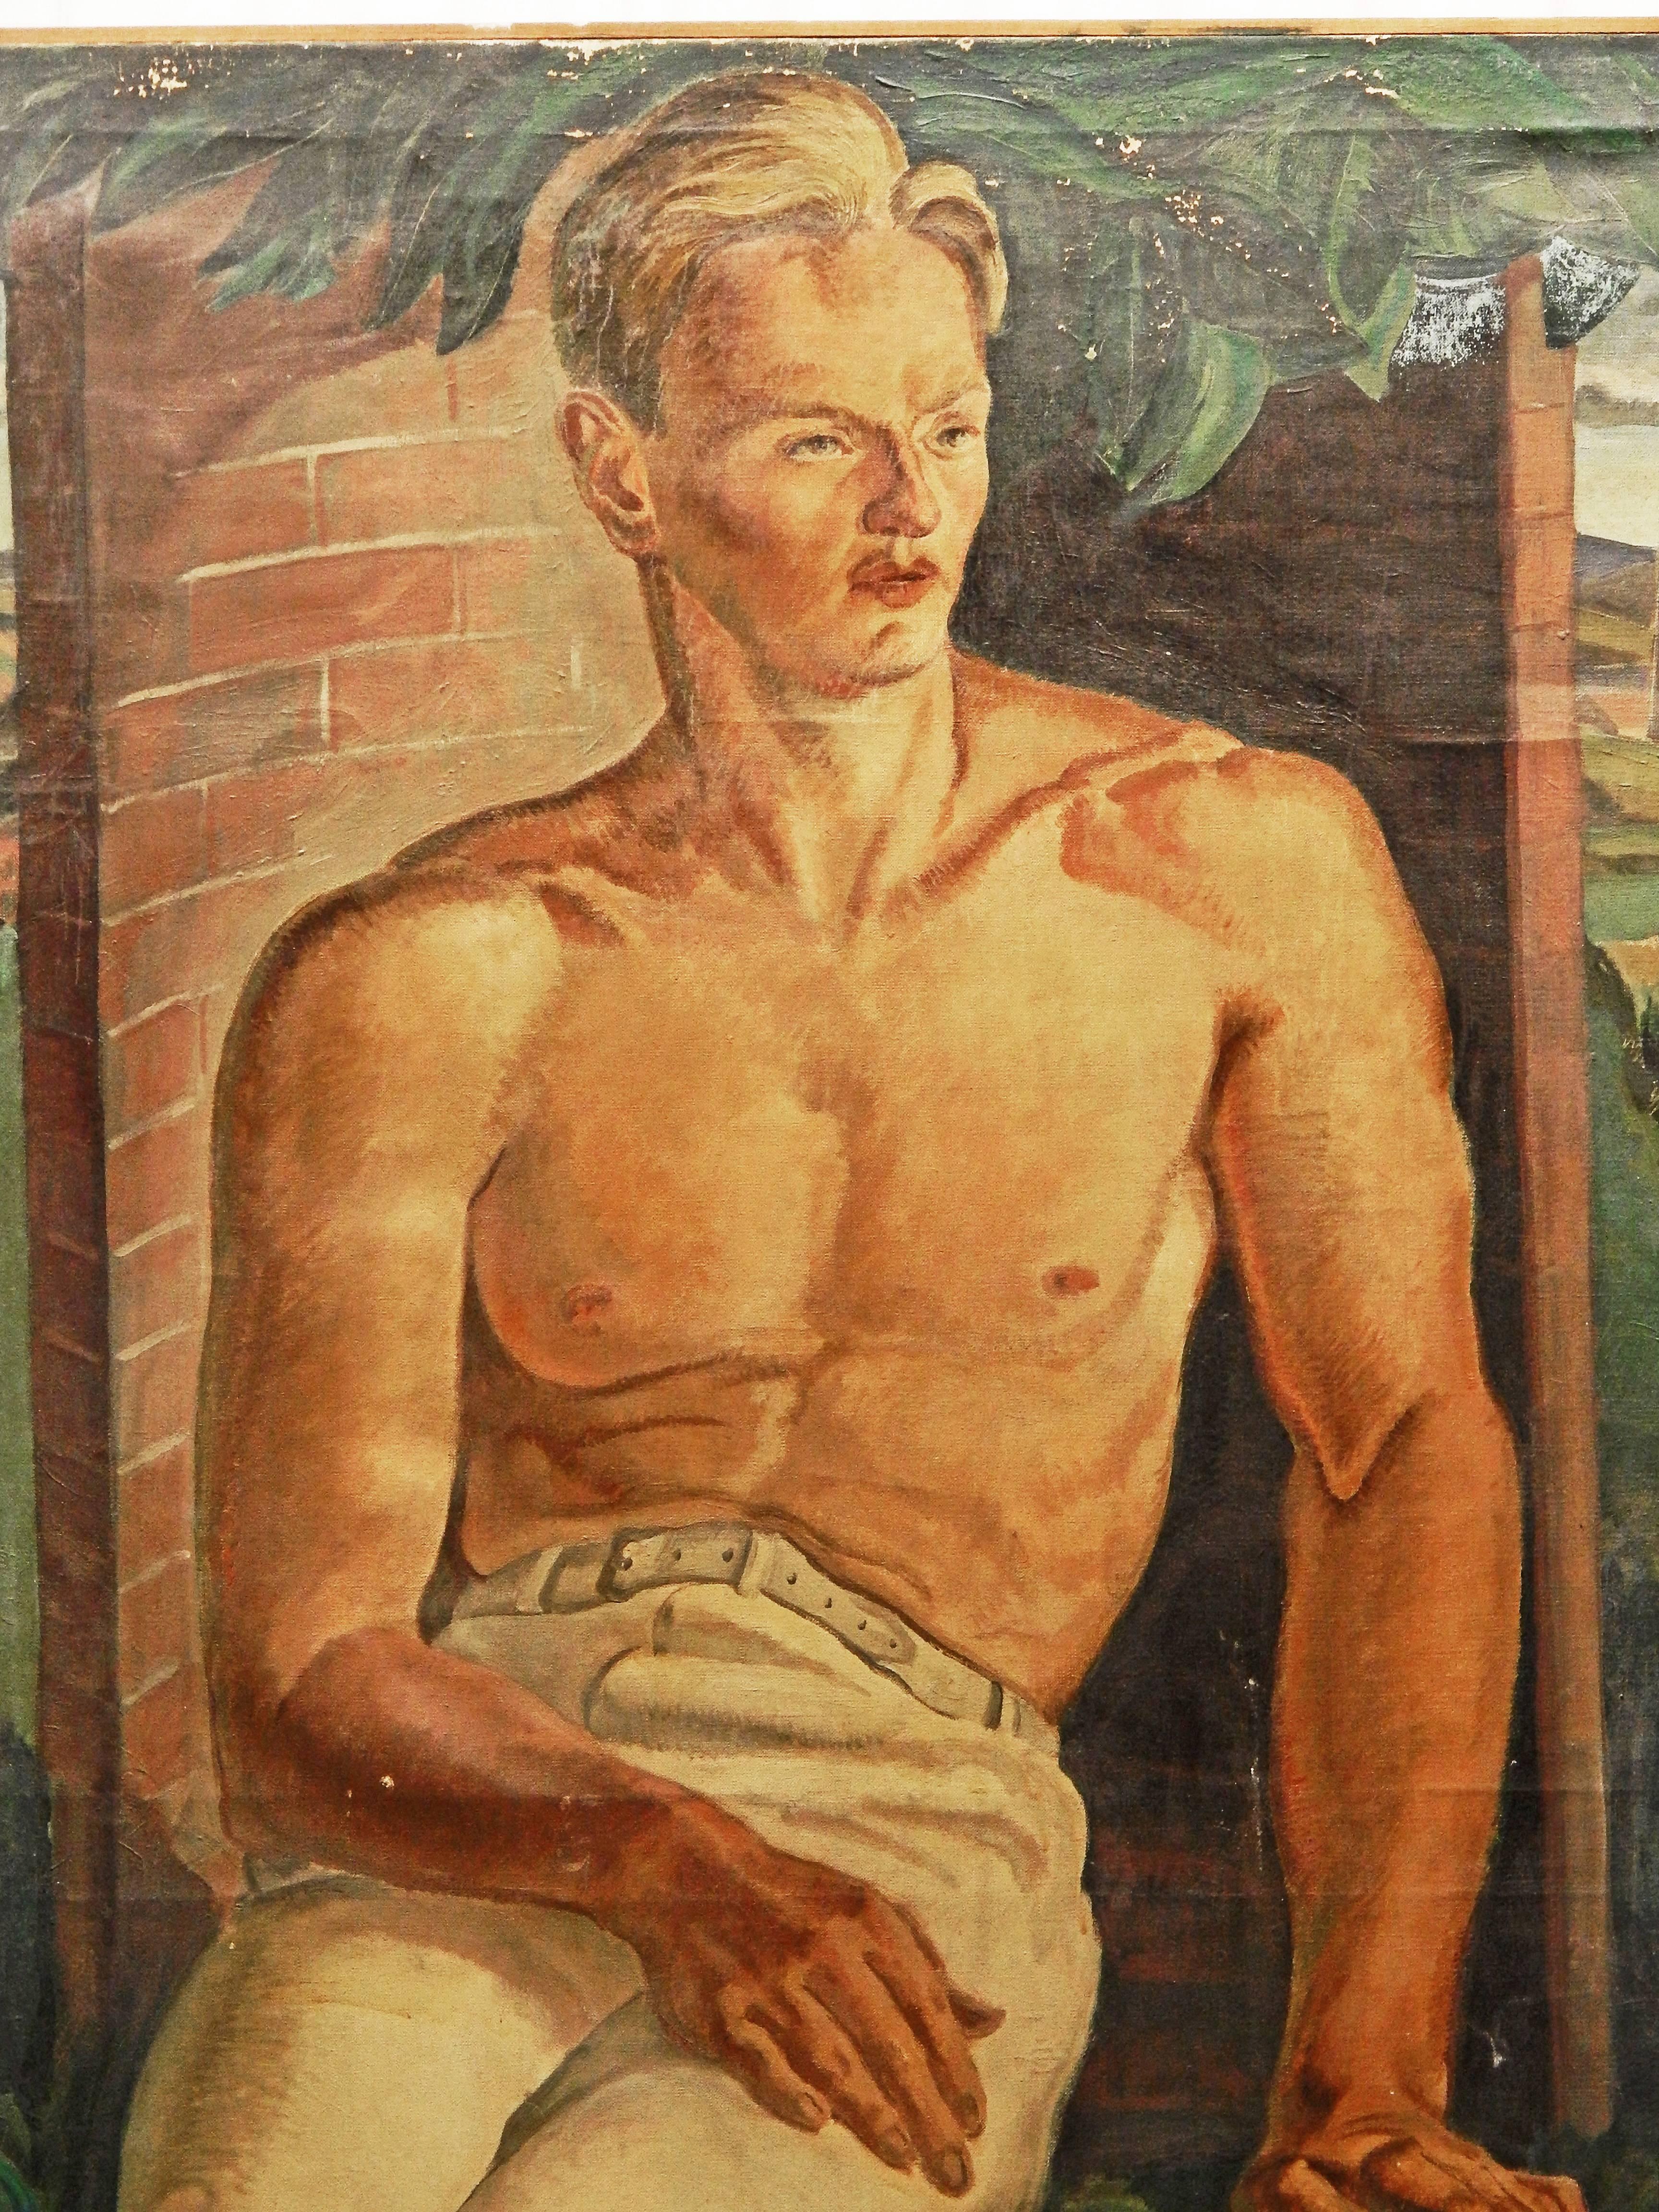 One of the finest depictions of an American worker from the 1930s that we have seen, this painting of a shirtless bricklayer, resting against a curved brick niche, with a half-built brick wall to one side, is a classic example of American social